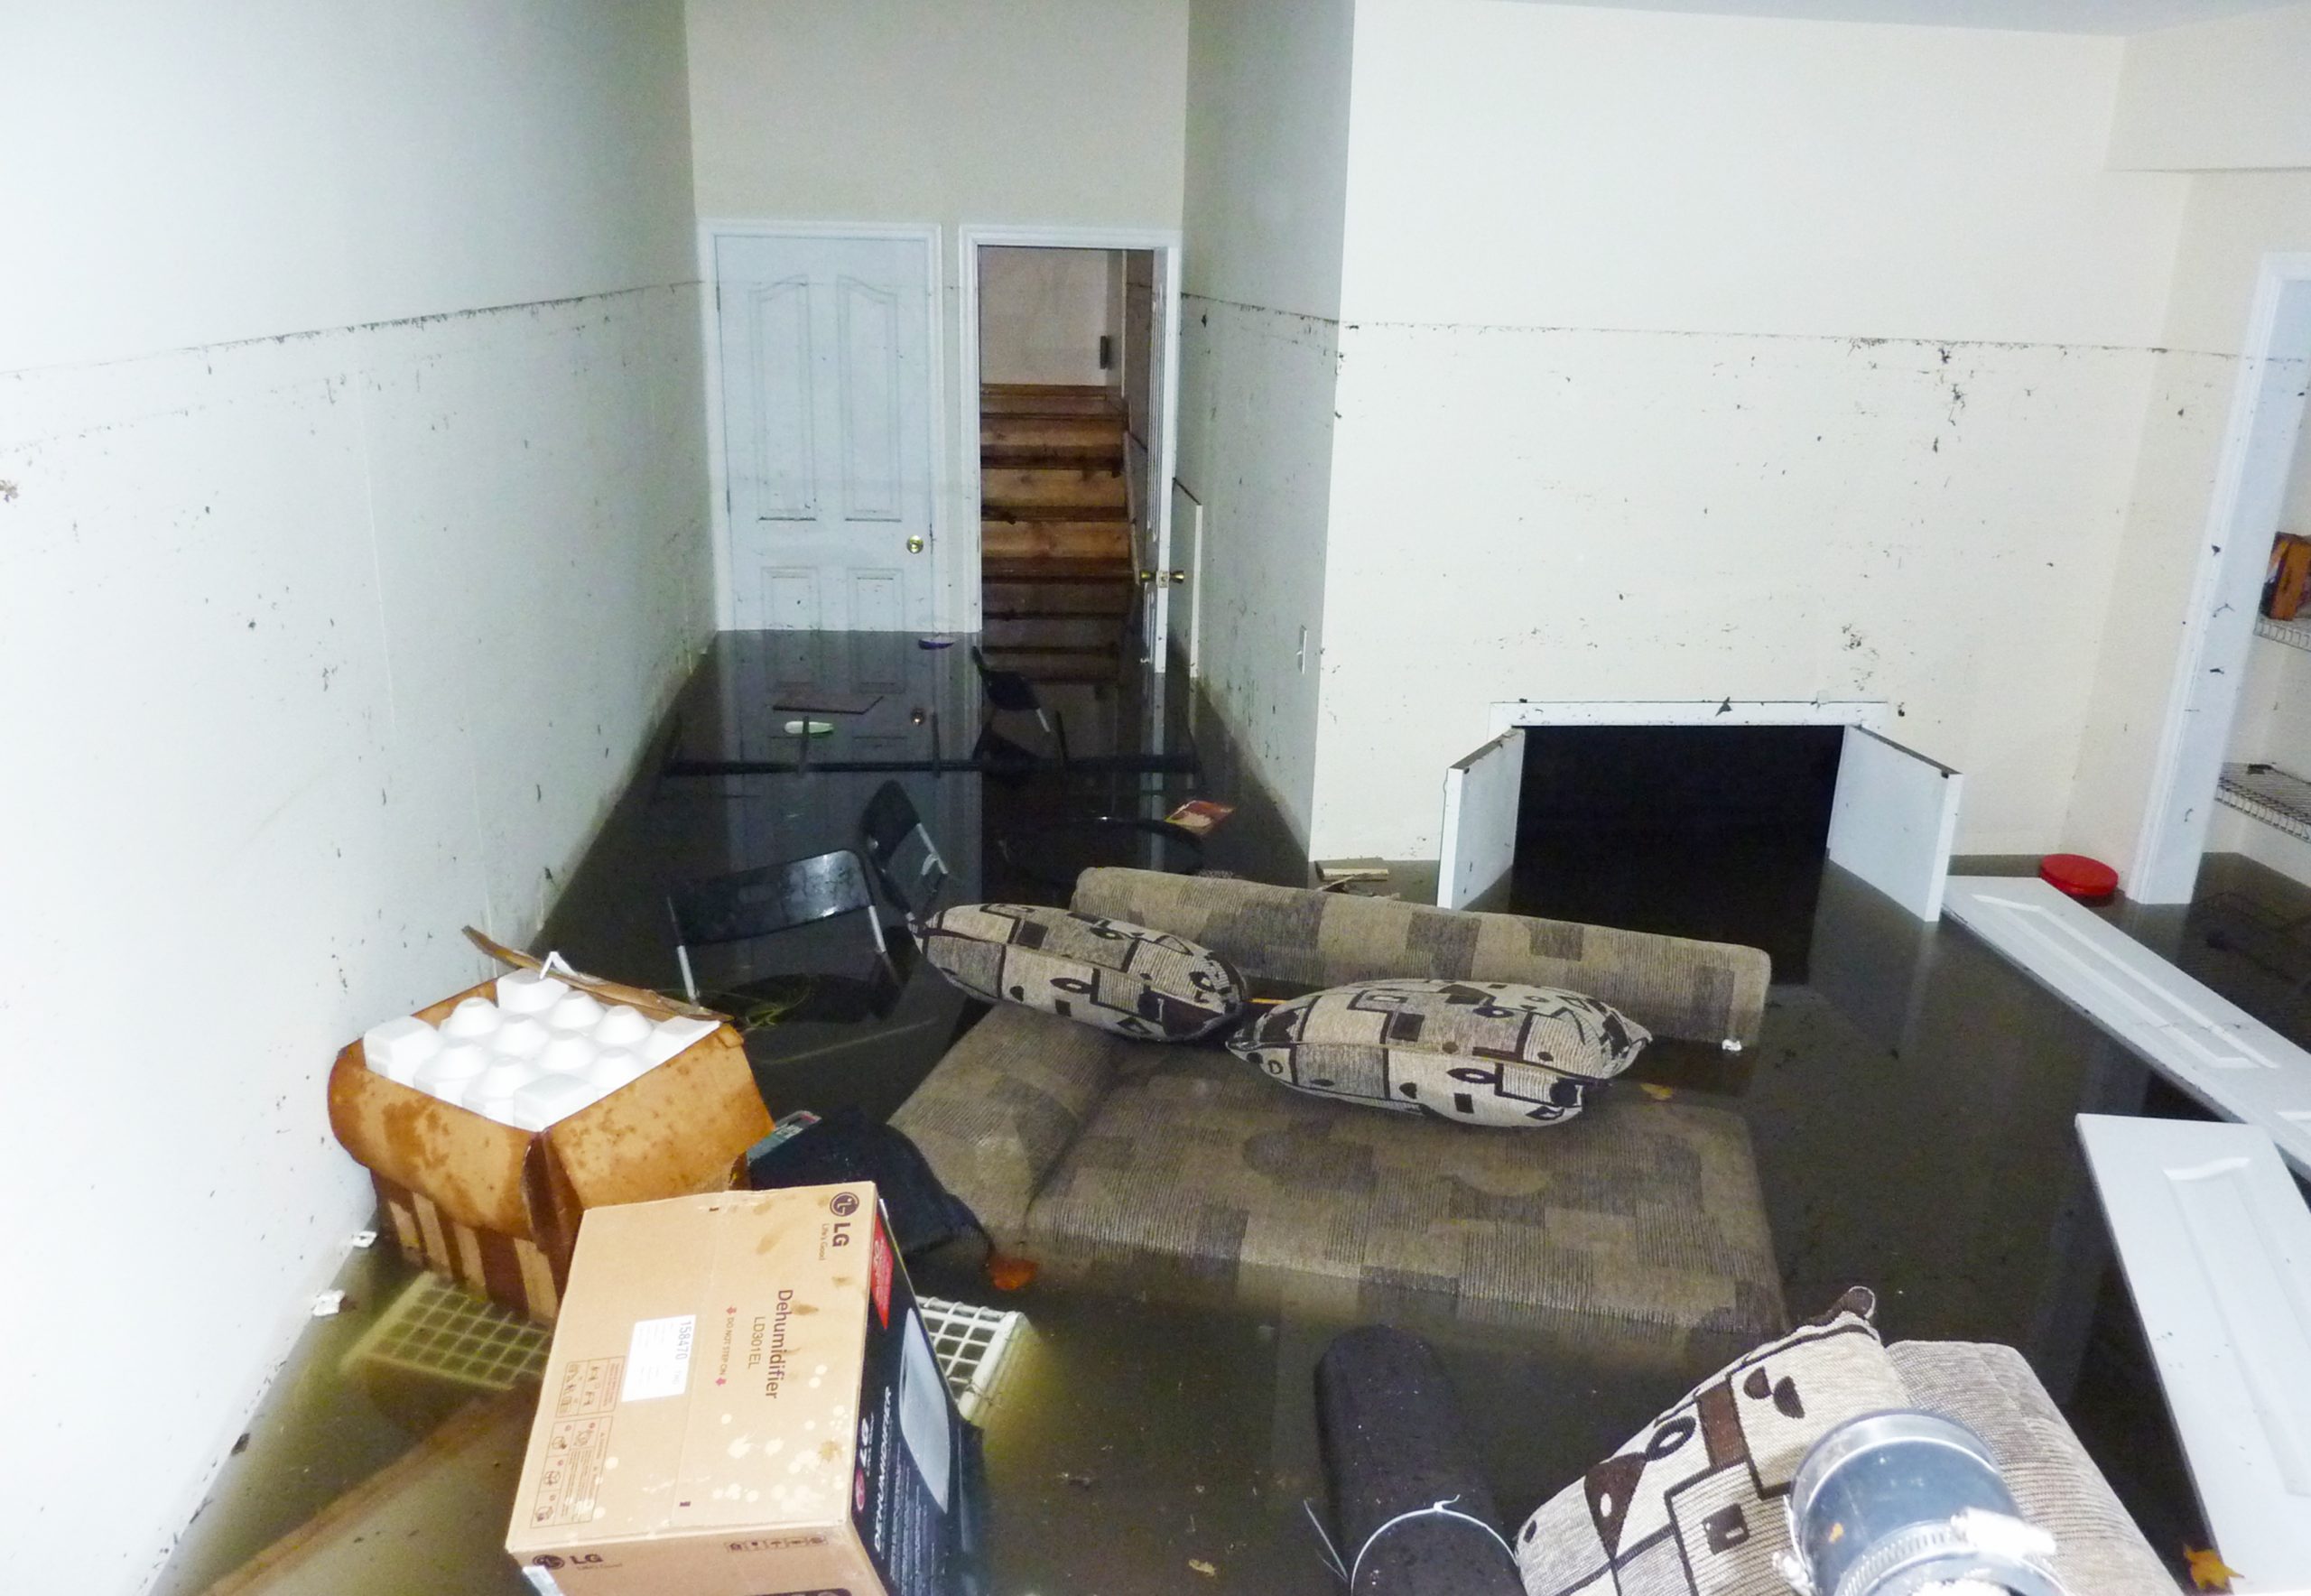 Completely flooded basement in North York, Toronto, Canada